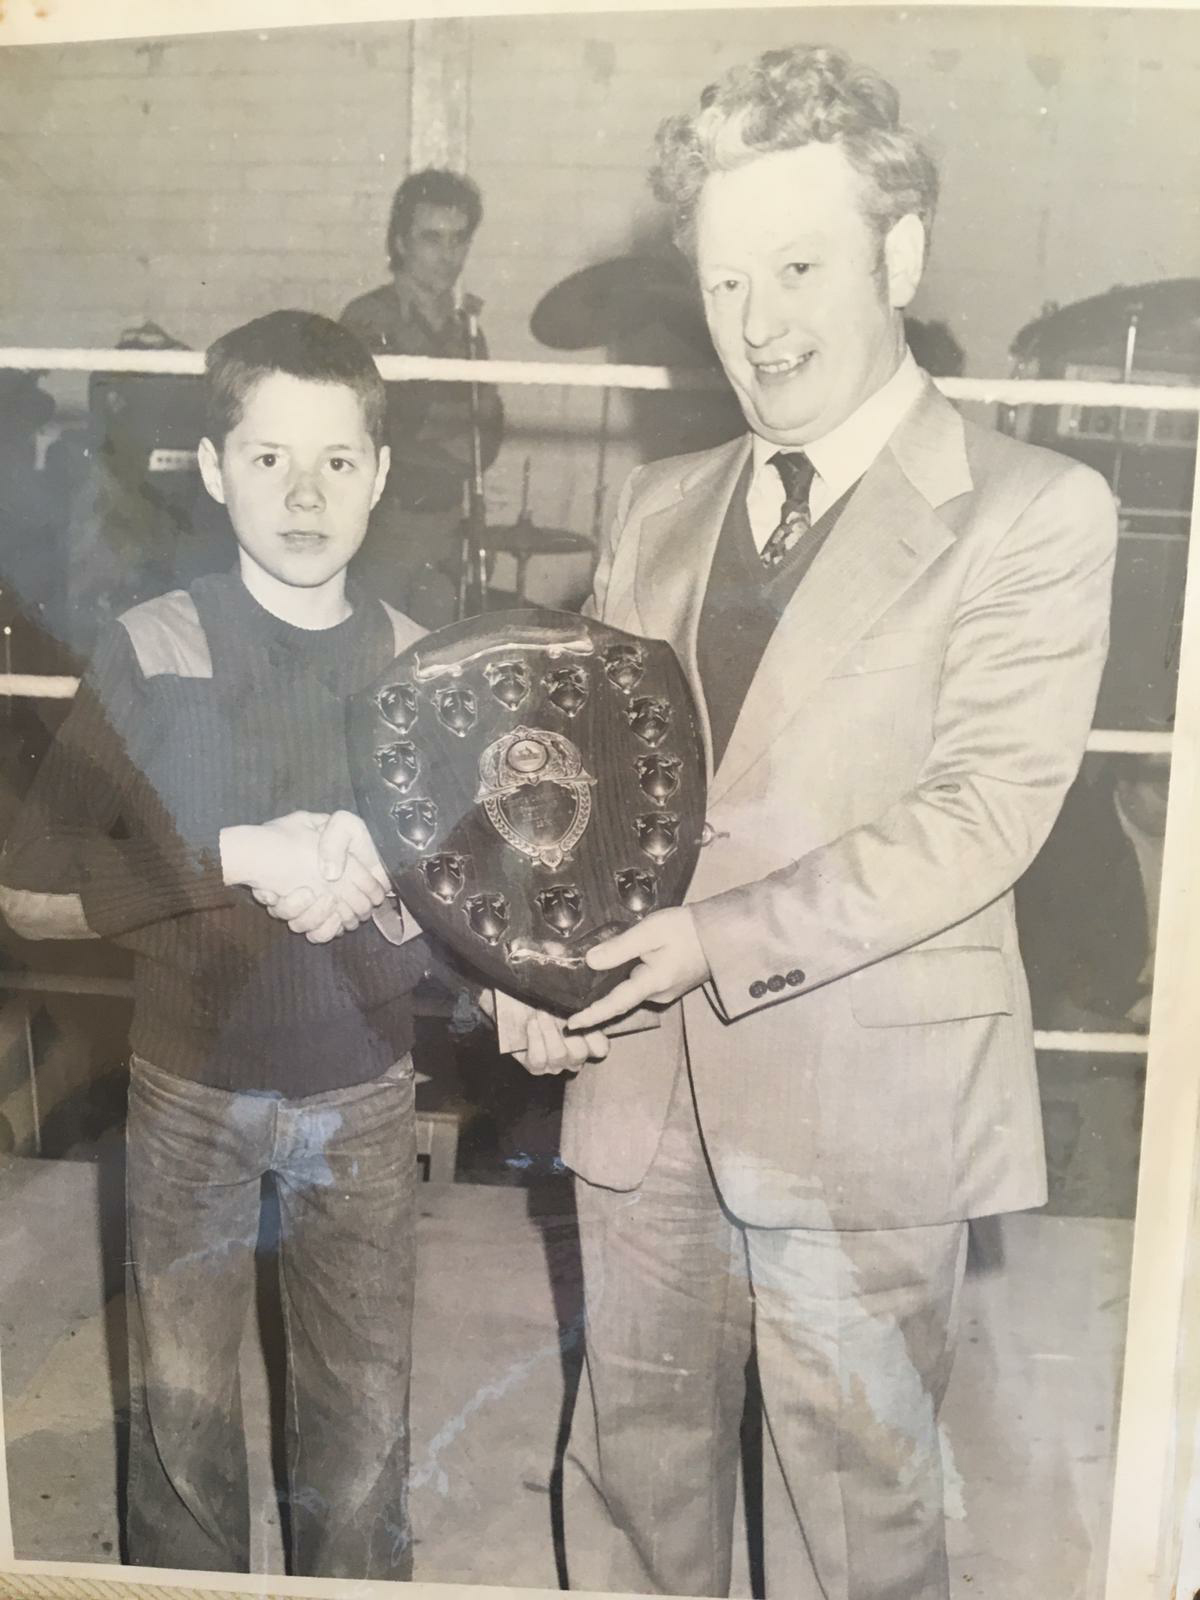 HONOURS: Peter accepting boxing award in his youth for Corpus Christi ABC